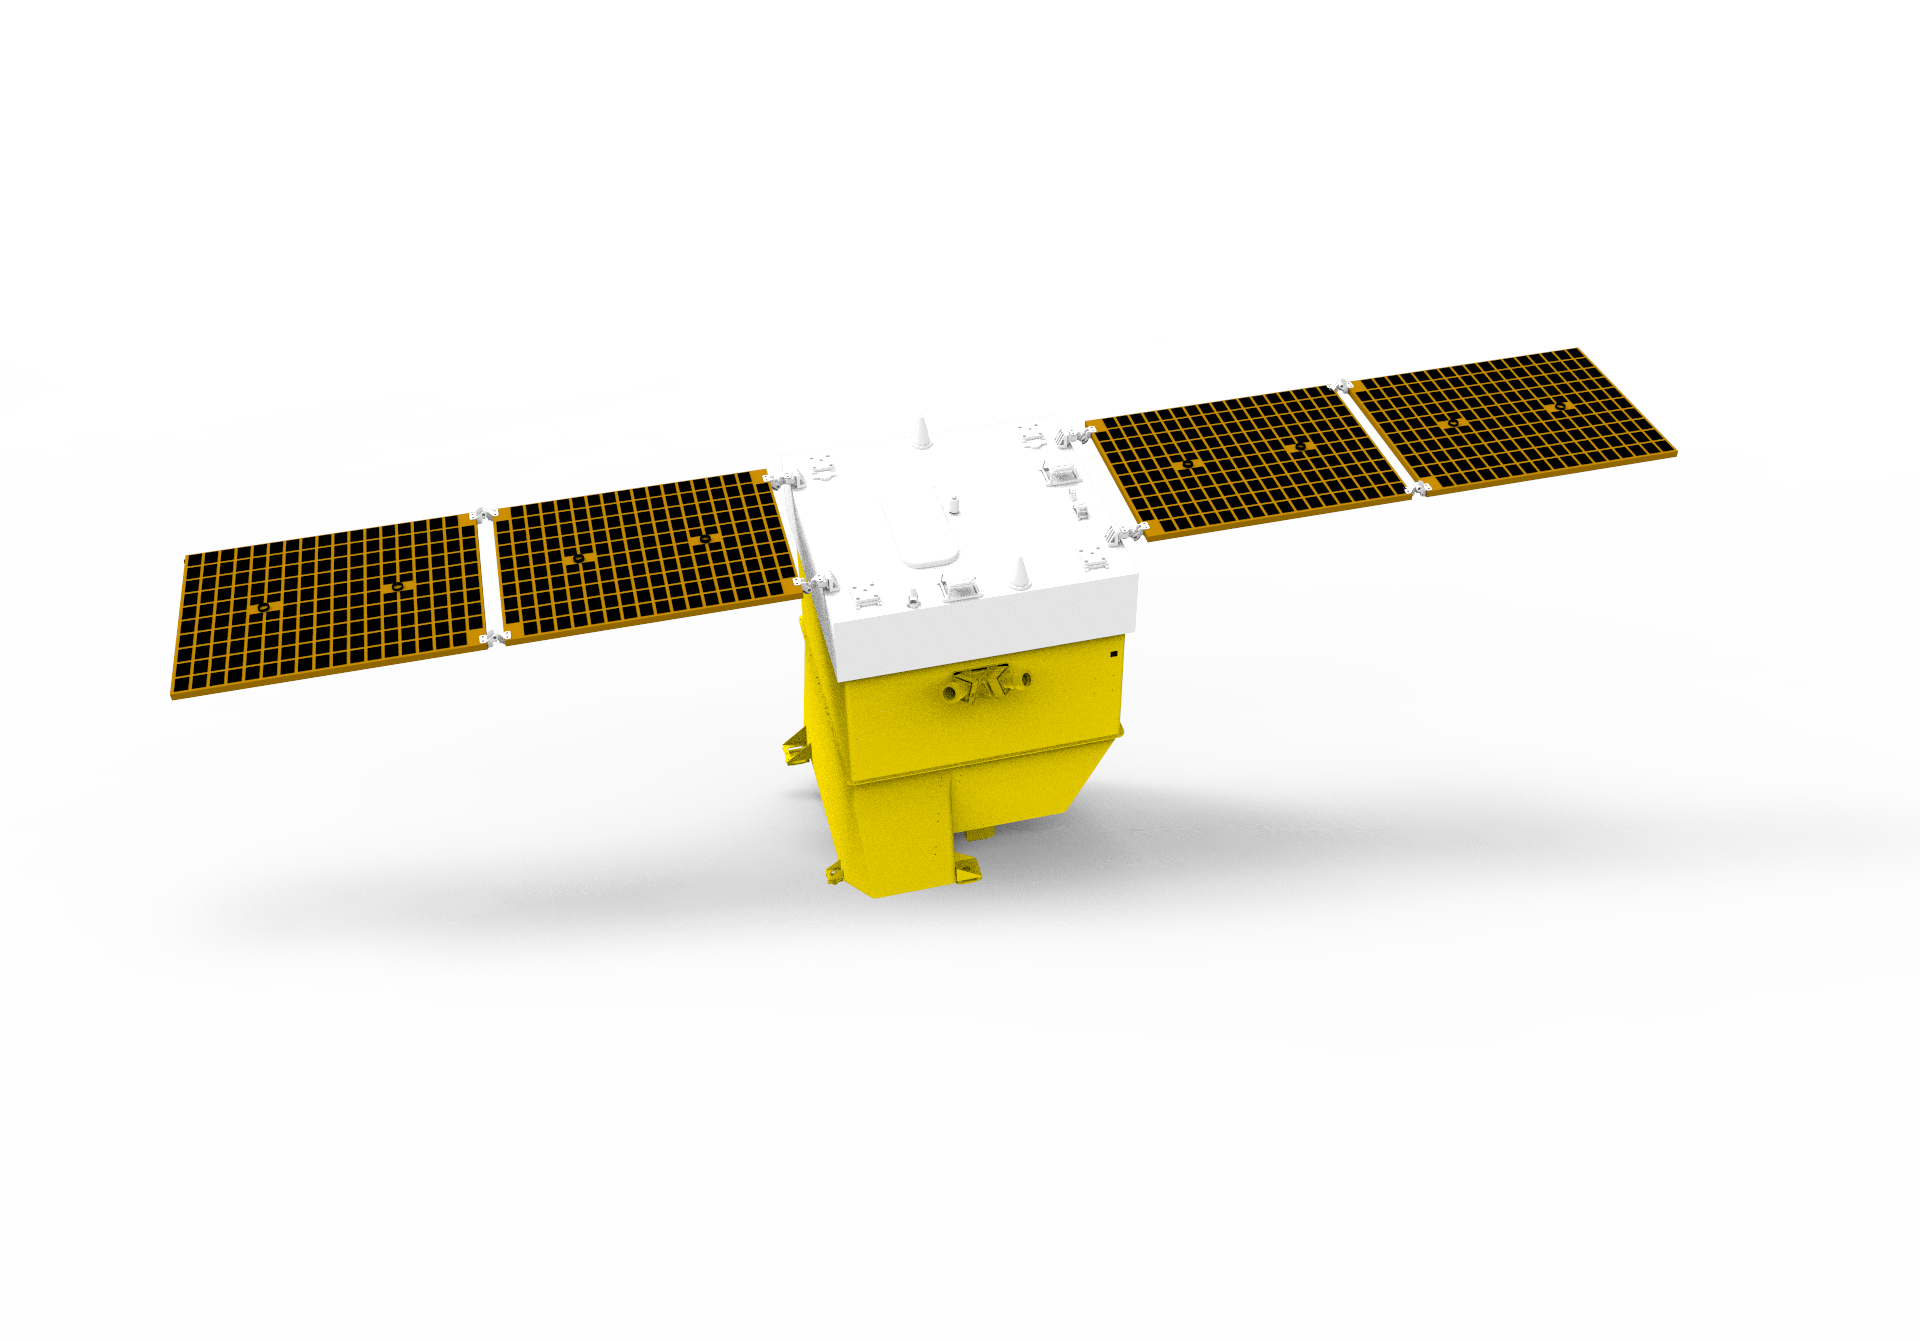 The render graph of the "HKUST-FYBB#1" satellite. (Provided by CGSTL)